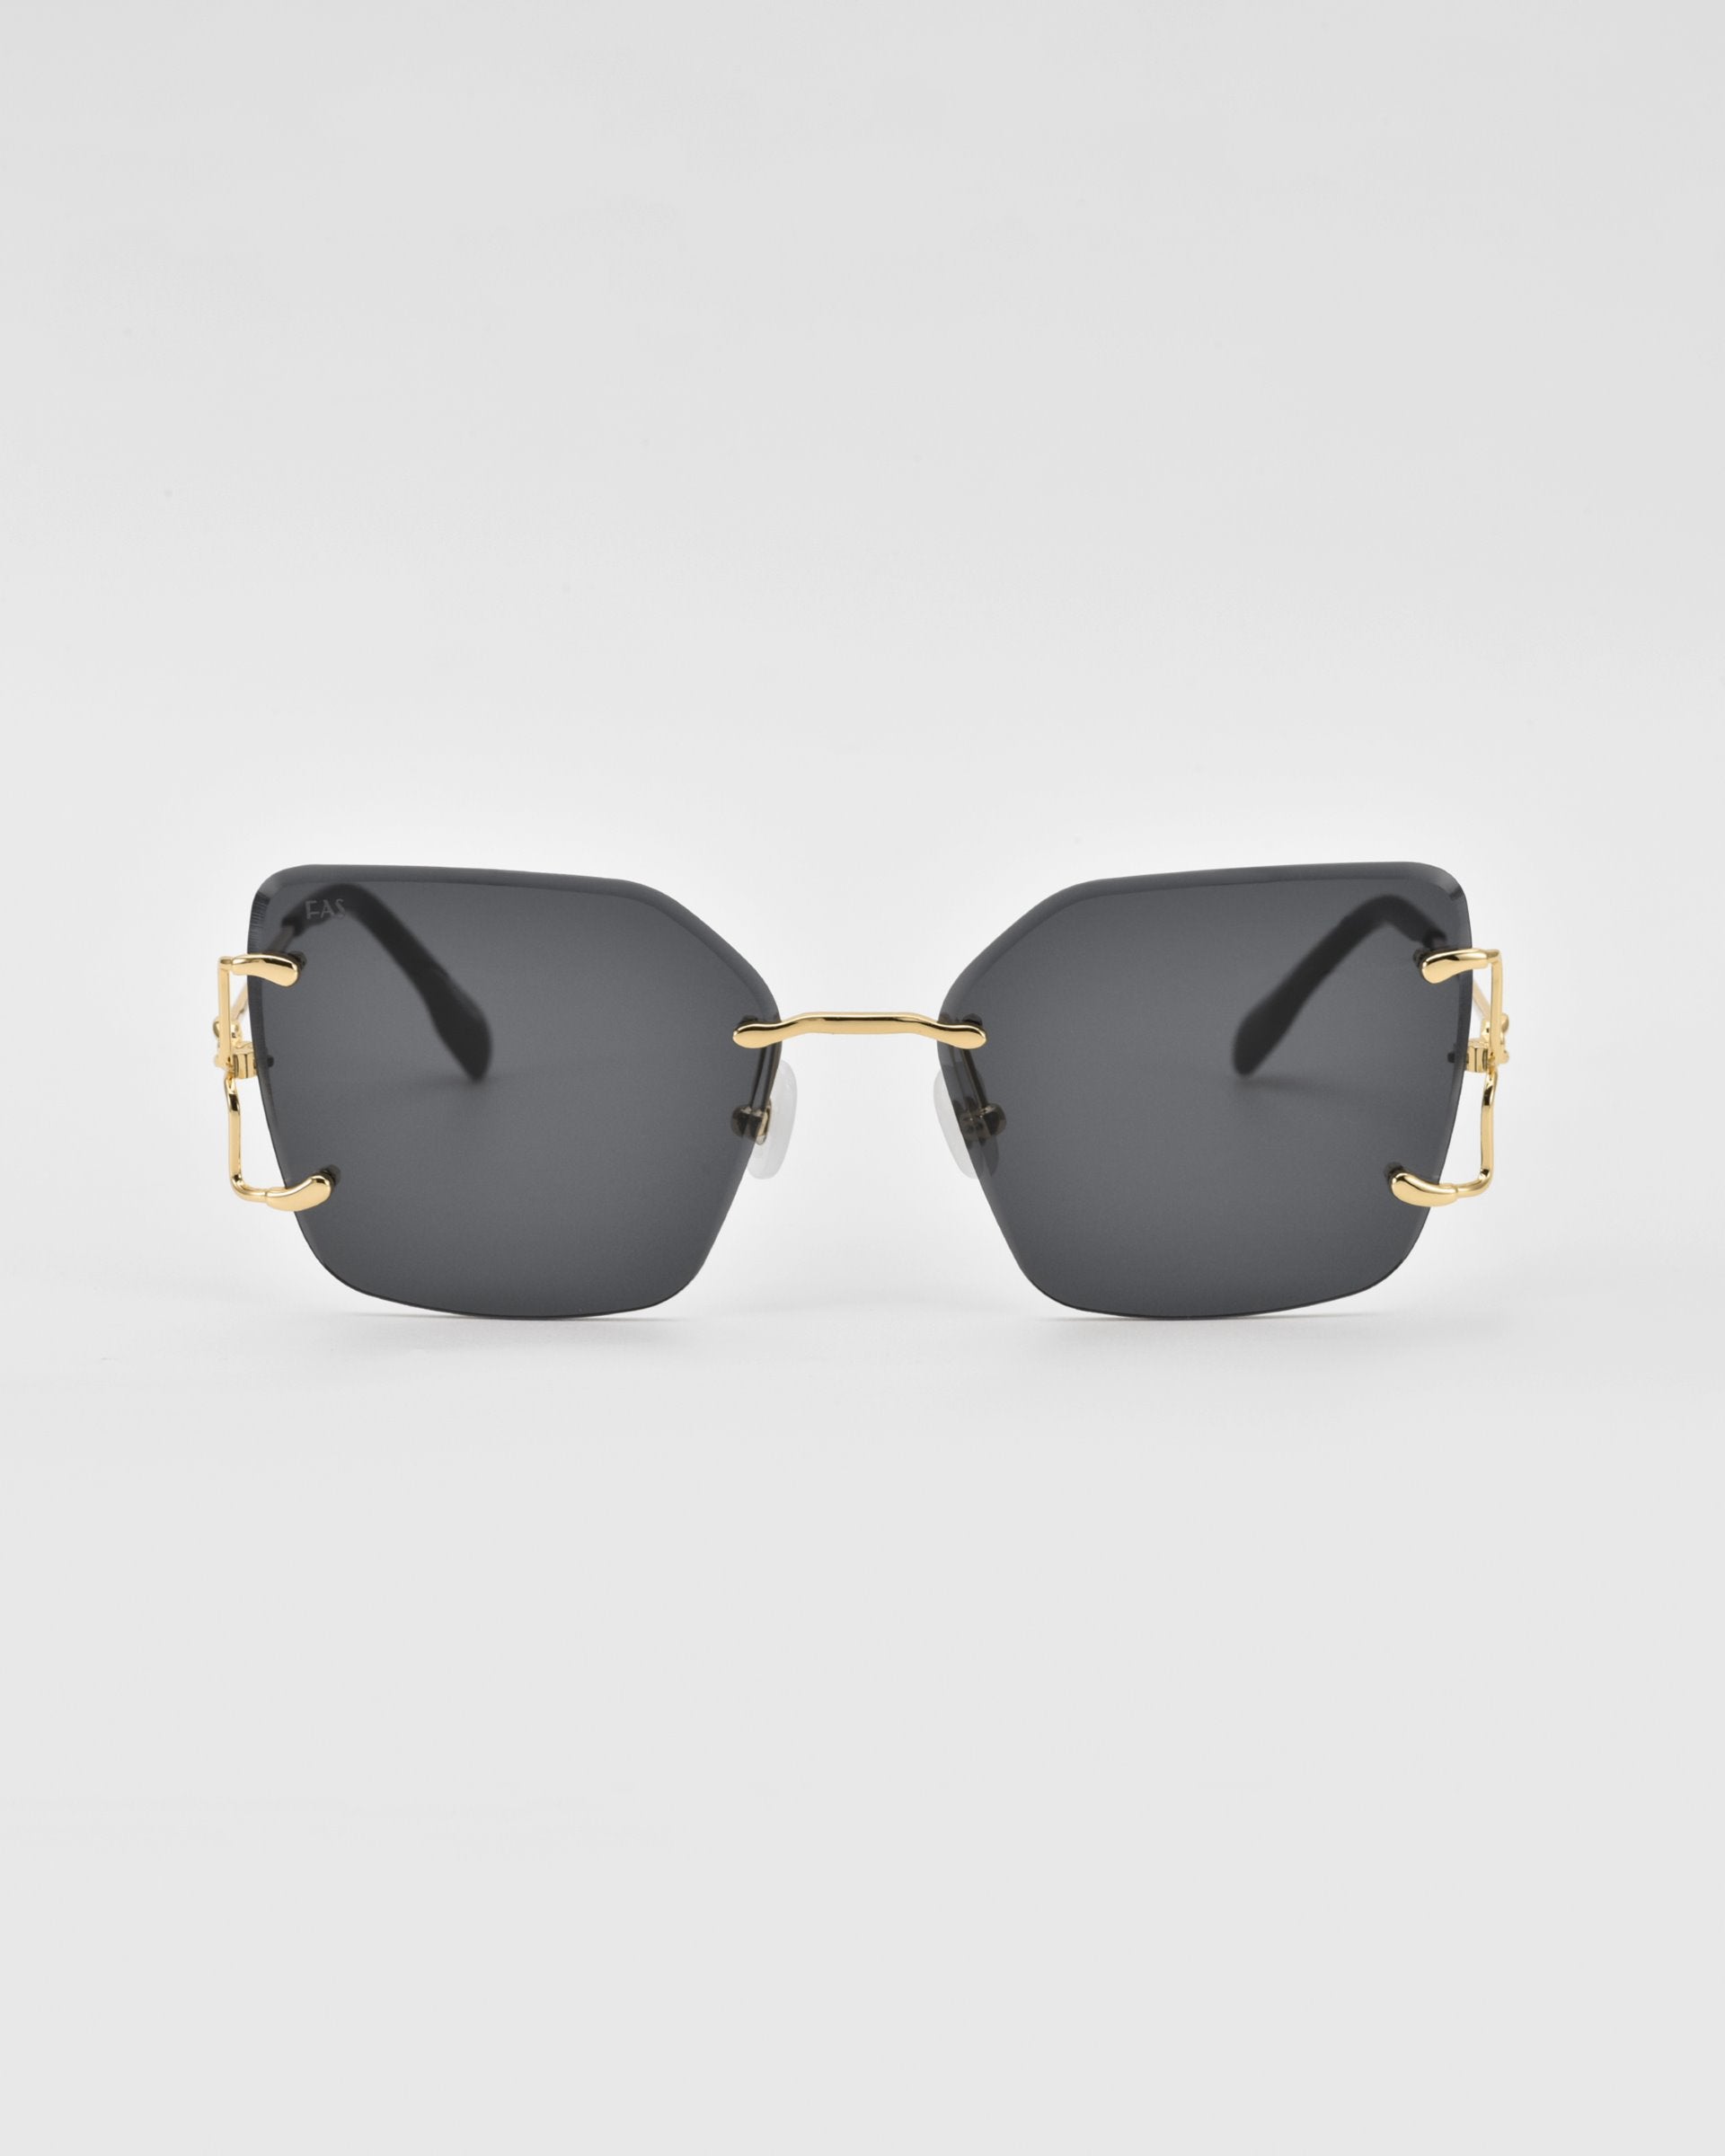 A pair of modern, oversized square lenses sunglasses with dark tinted lenses and gold-colored metal accents on the temples. The For Art's Sake® Starlit sunglasses feature jade-stone nosepads, and the minimalistic frame lacks a visible border around the lenses, creating a sleek and stylish design against a plain white background.